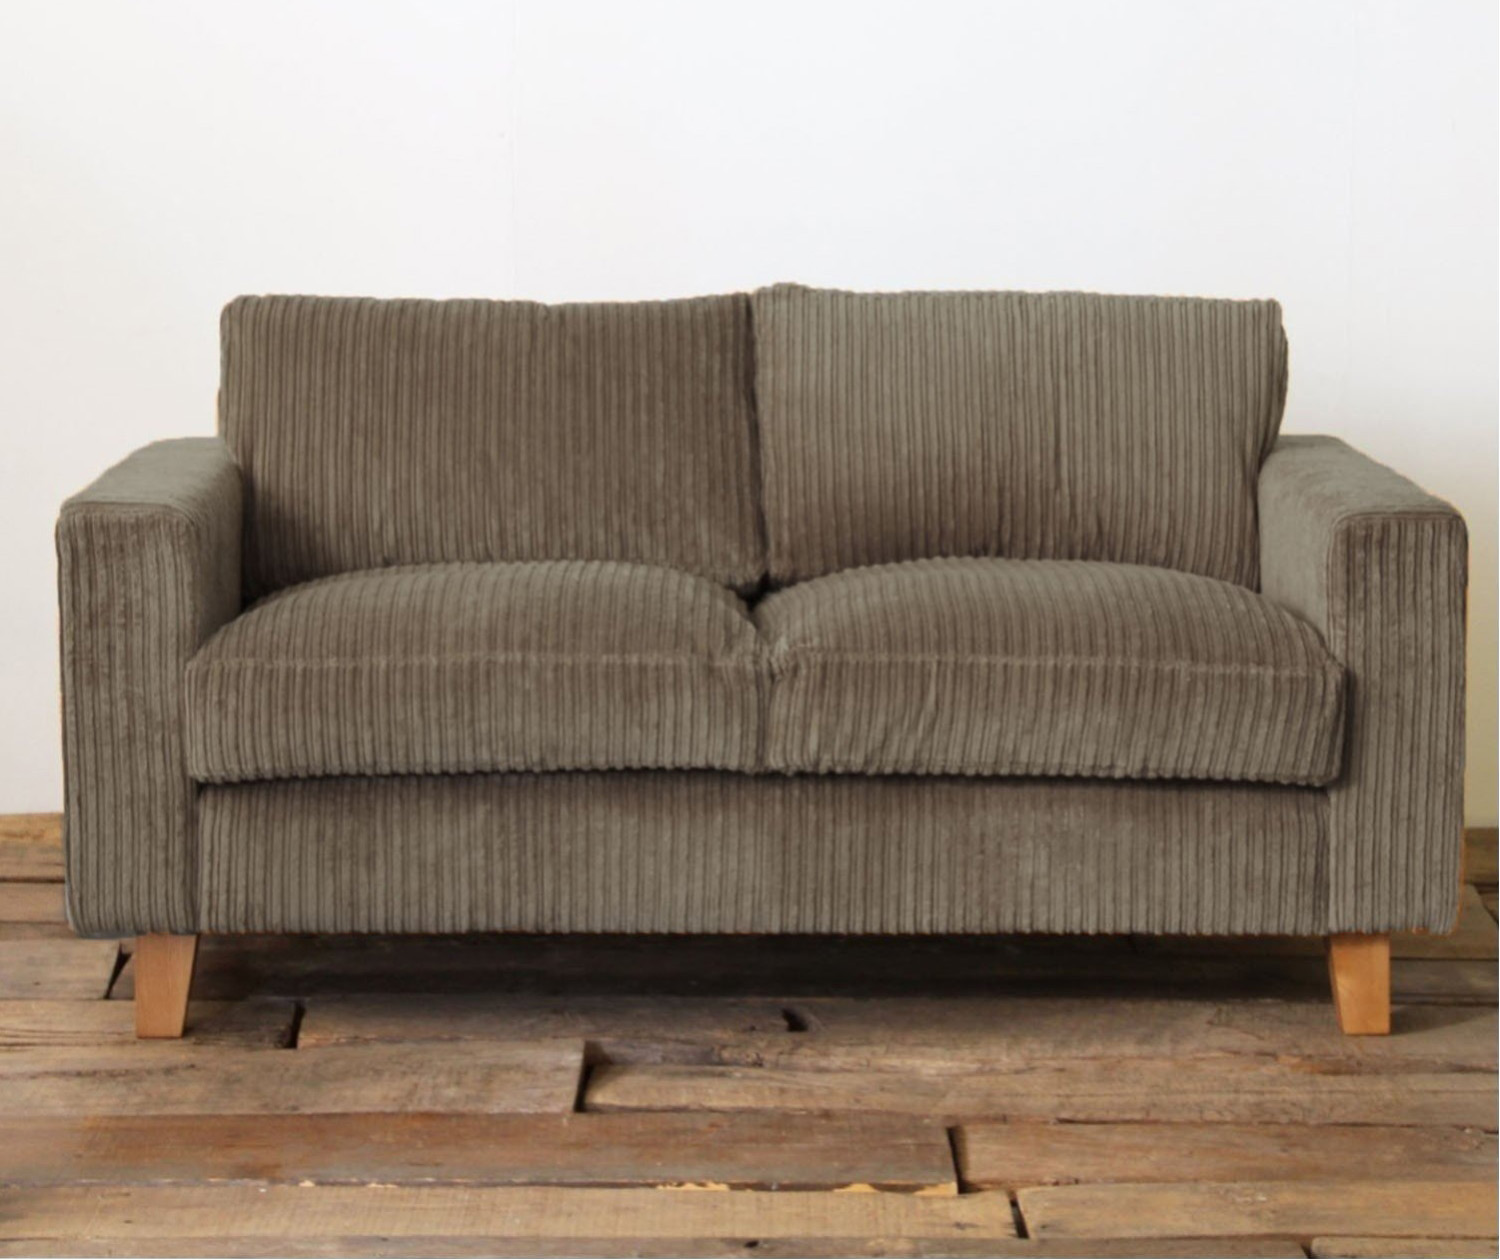 ACME Furniture アクメファニチャー JETTY feather SOFA 2SEATER 